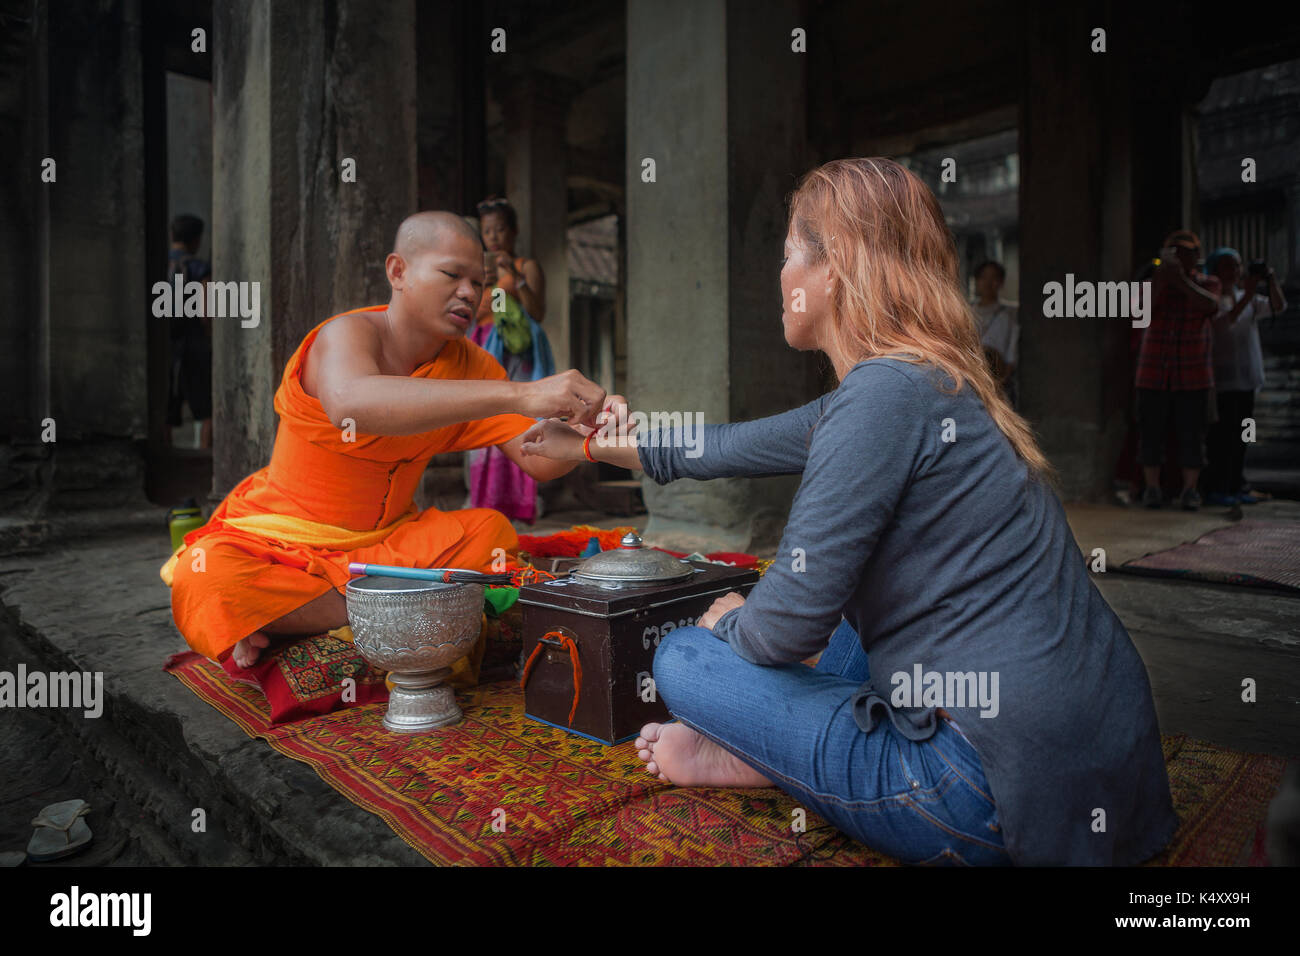 A tourist at Angkor Wat temple complex receives a blessing from a Buddhist monk. The temple complex is located in Siem Reap, Kingdom of Cambodia. Stock Photo